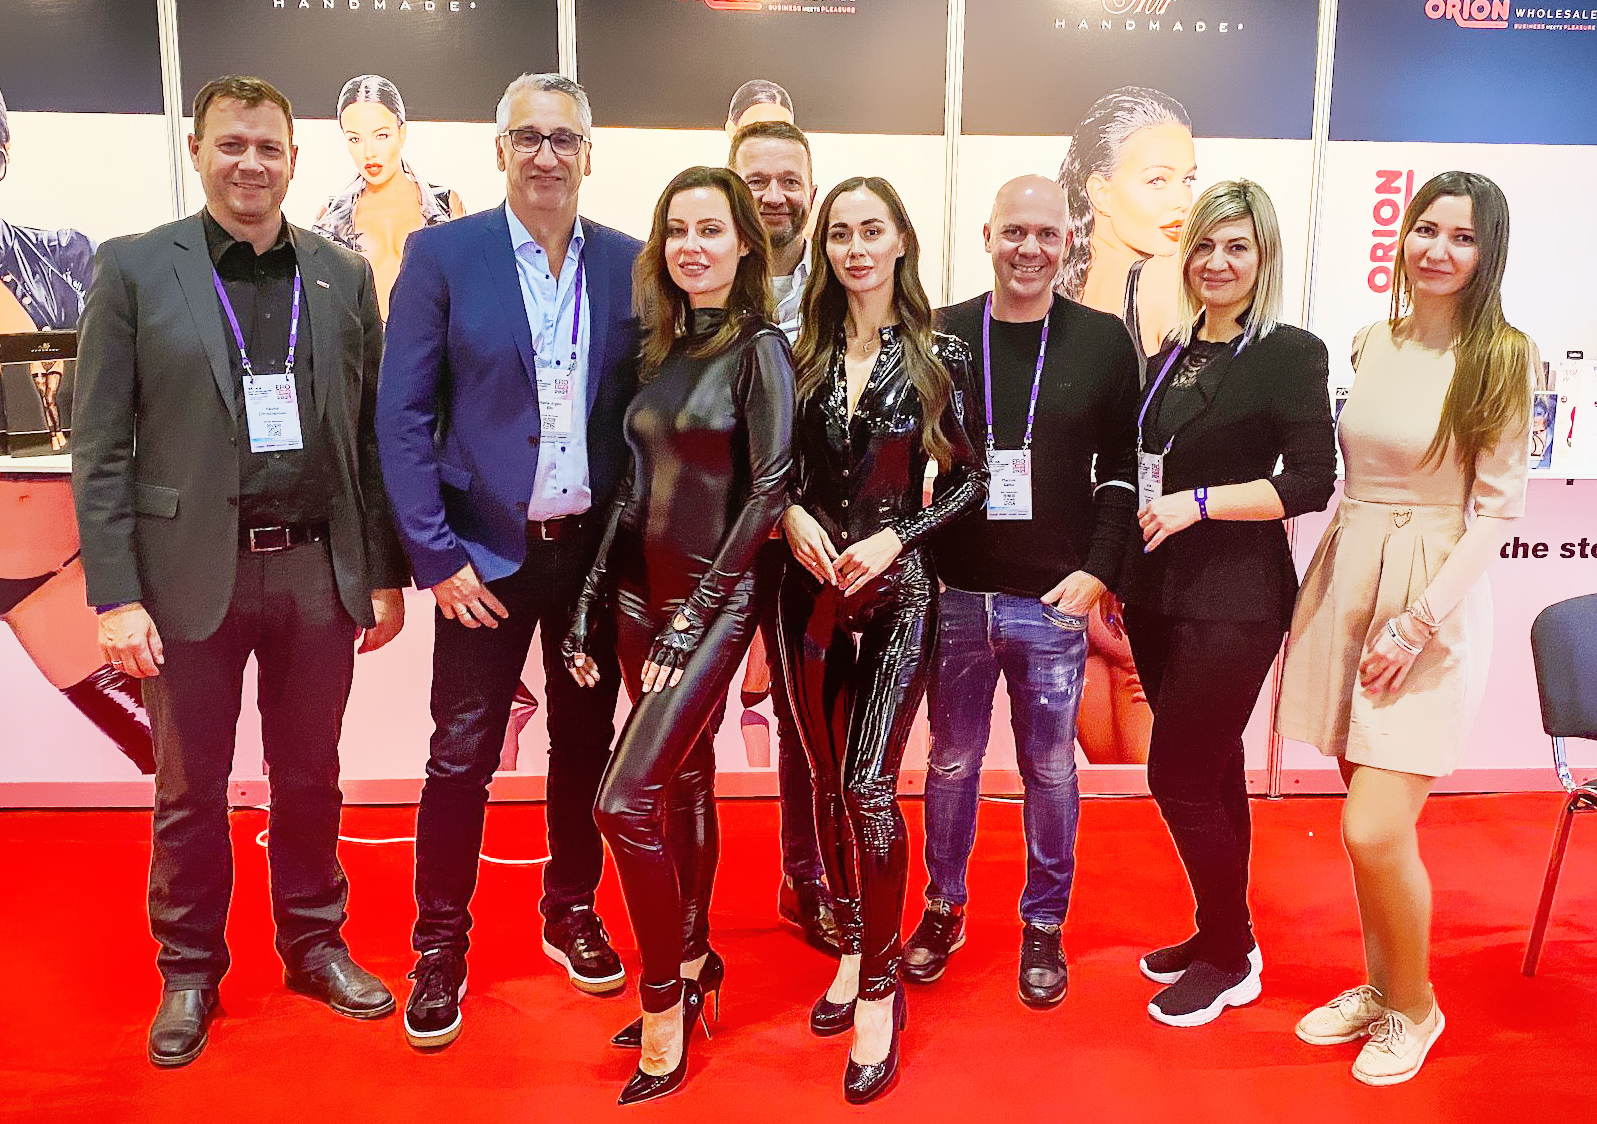 ORION Wholesale sums up a successful participation in the EroExpo